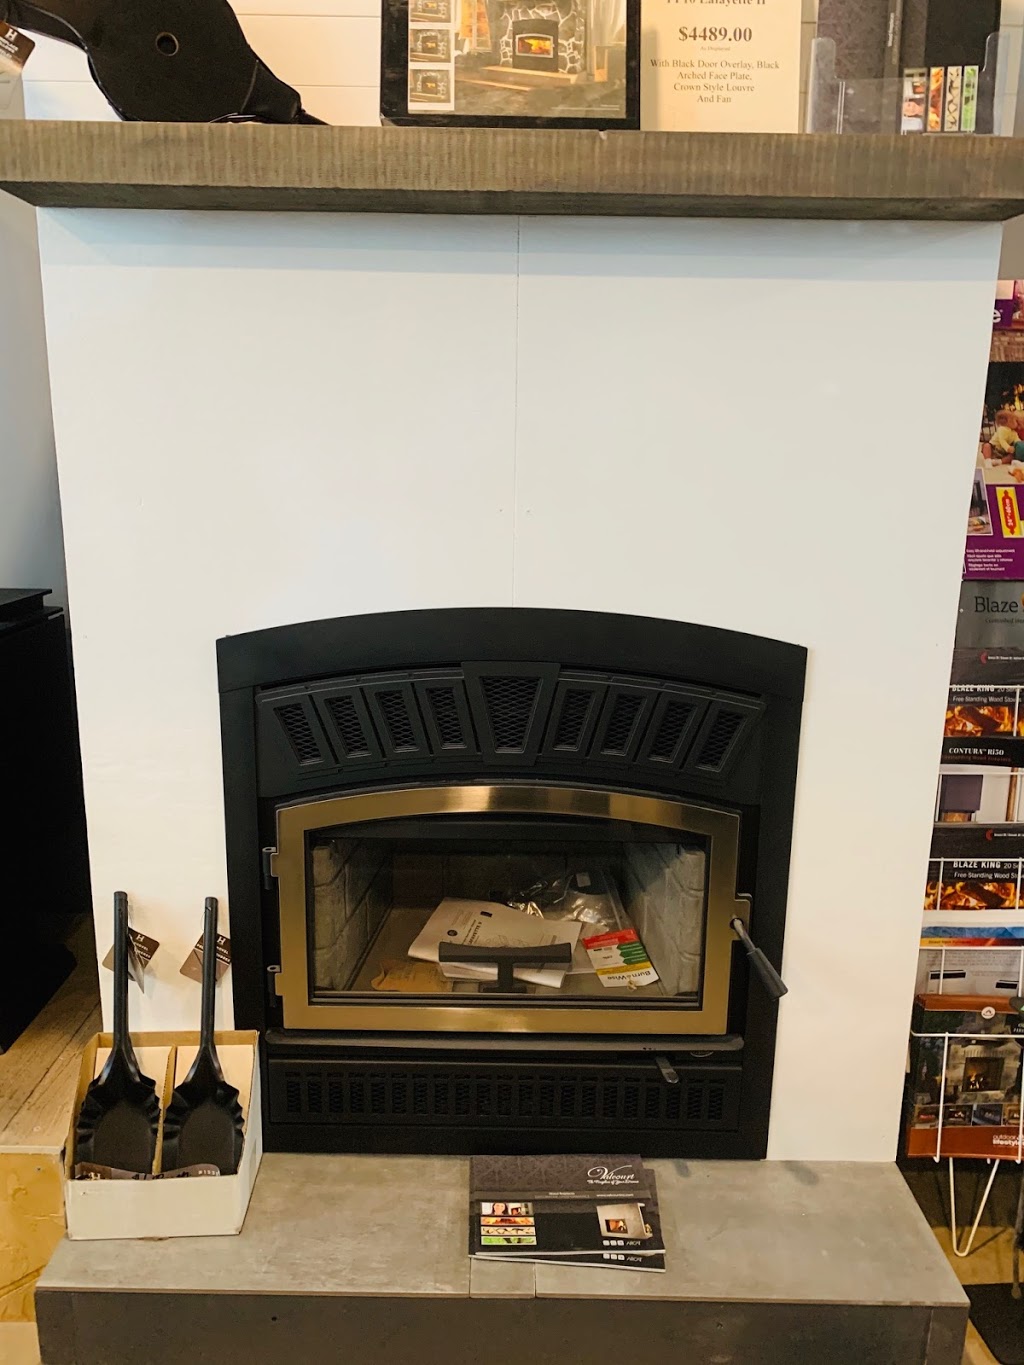 Salmon Arm Fireplace | home goods store | 1441 10 Ave SW #1, Salmon Arm, BC V1E 1T2, Canada | 2508040333 OR +1 250-804-0333